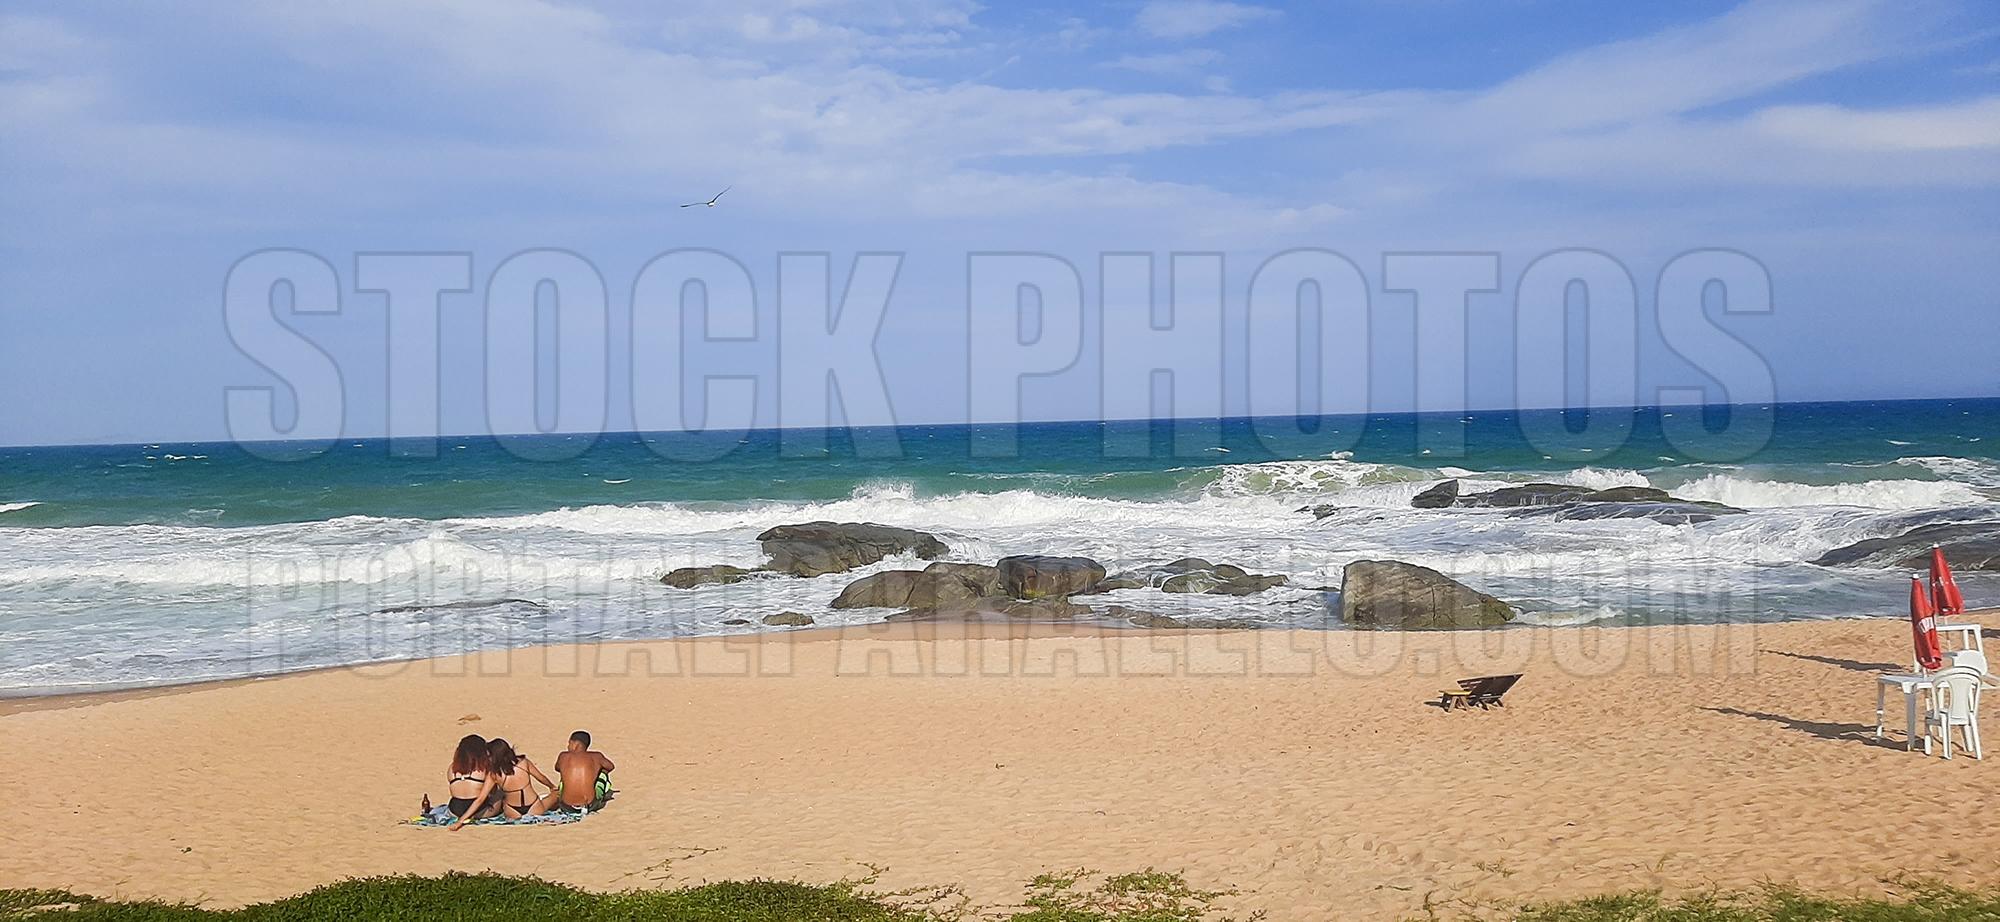 Three young people sitting on the beach admiring the sea